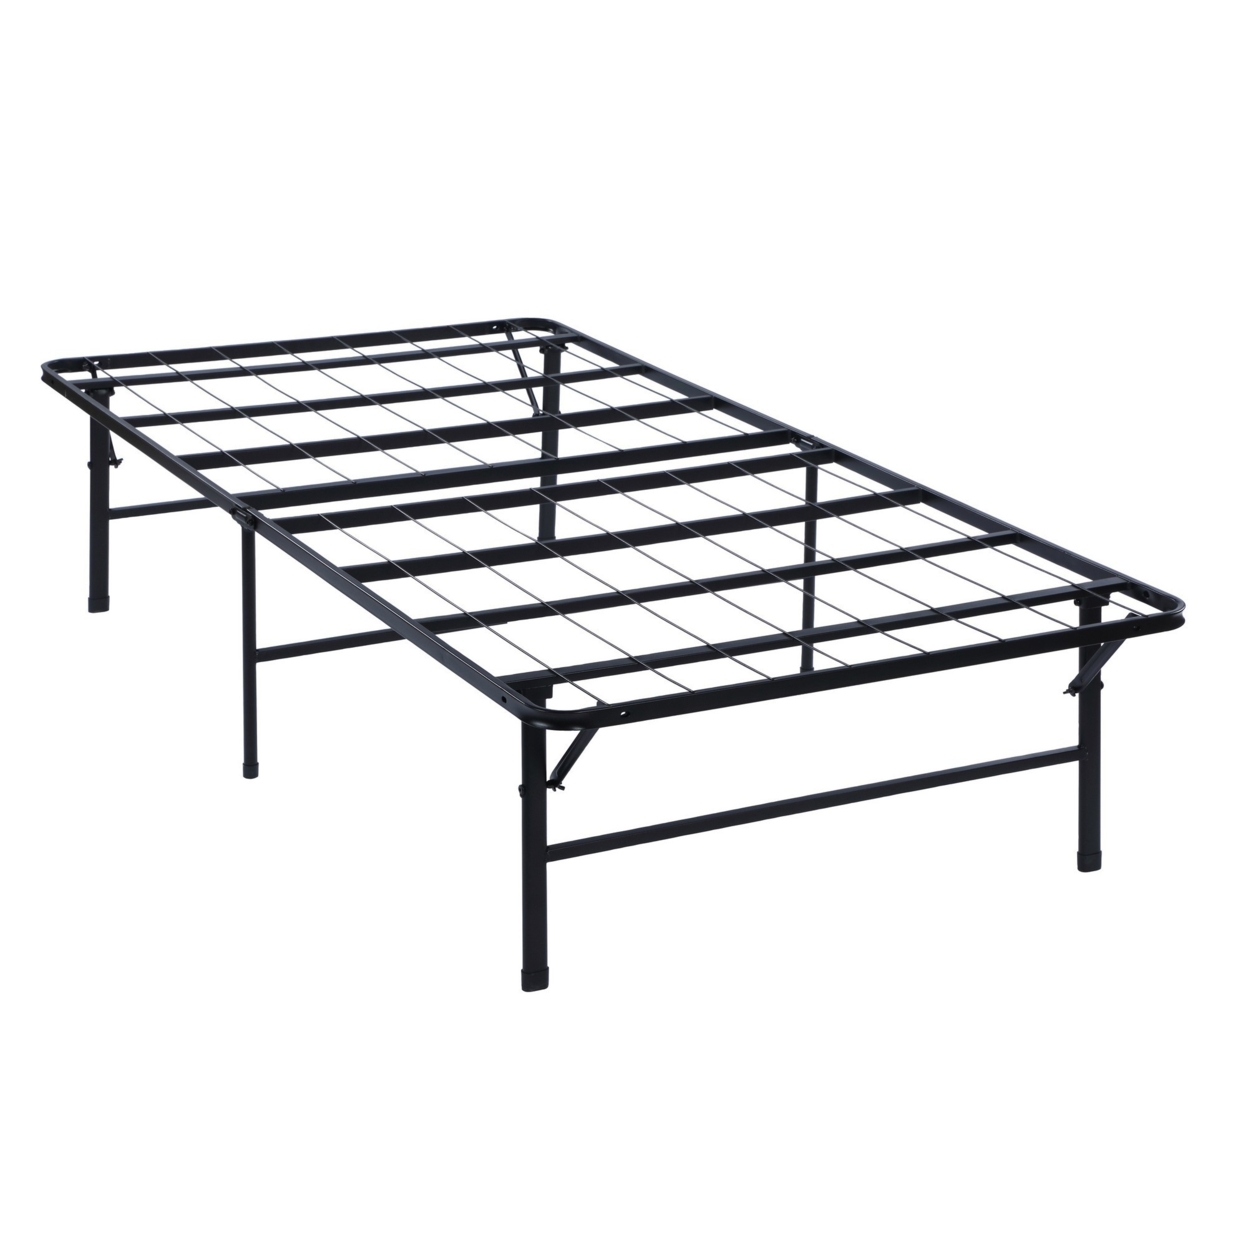 Adel Extra Long Twin Size Low Profile Bed, Foldable Metal Frame, Black